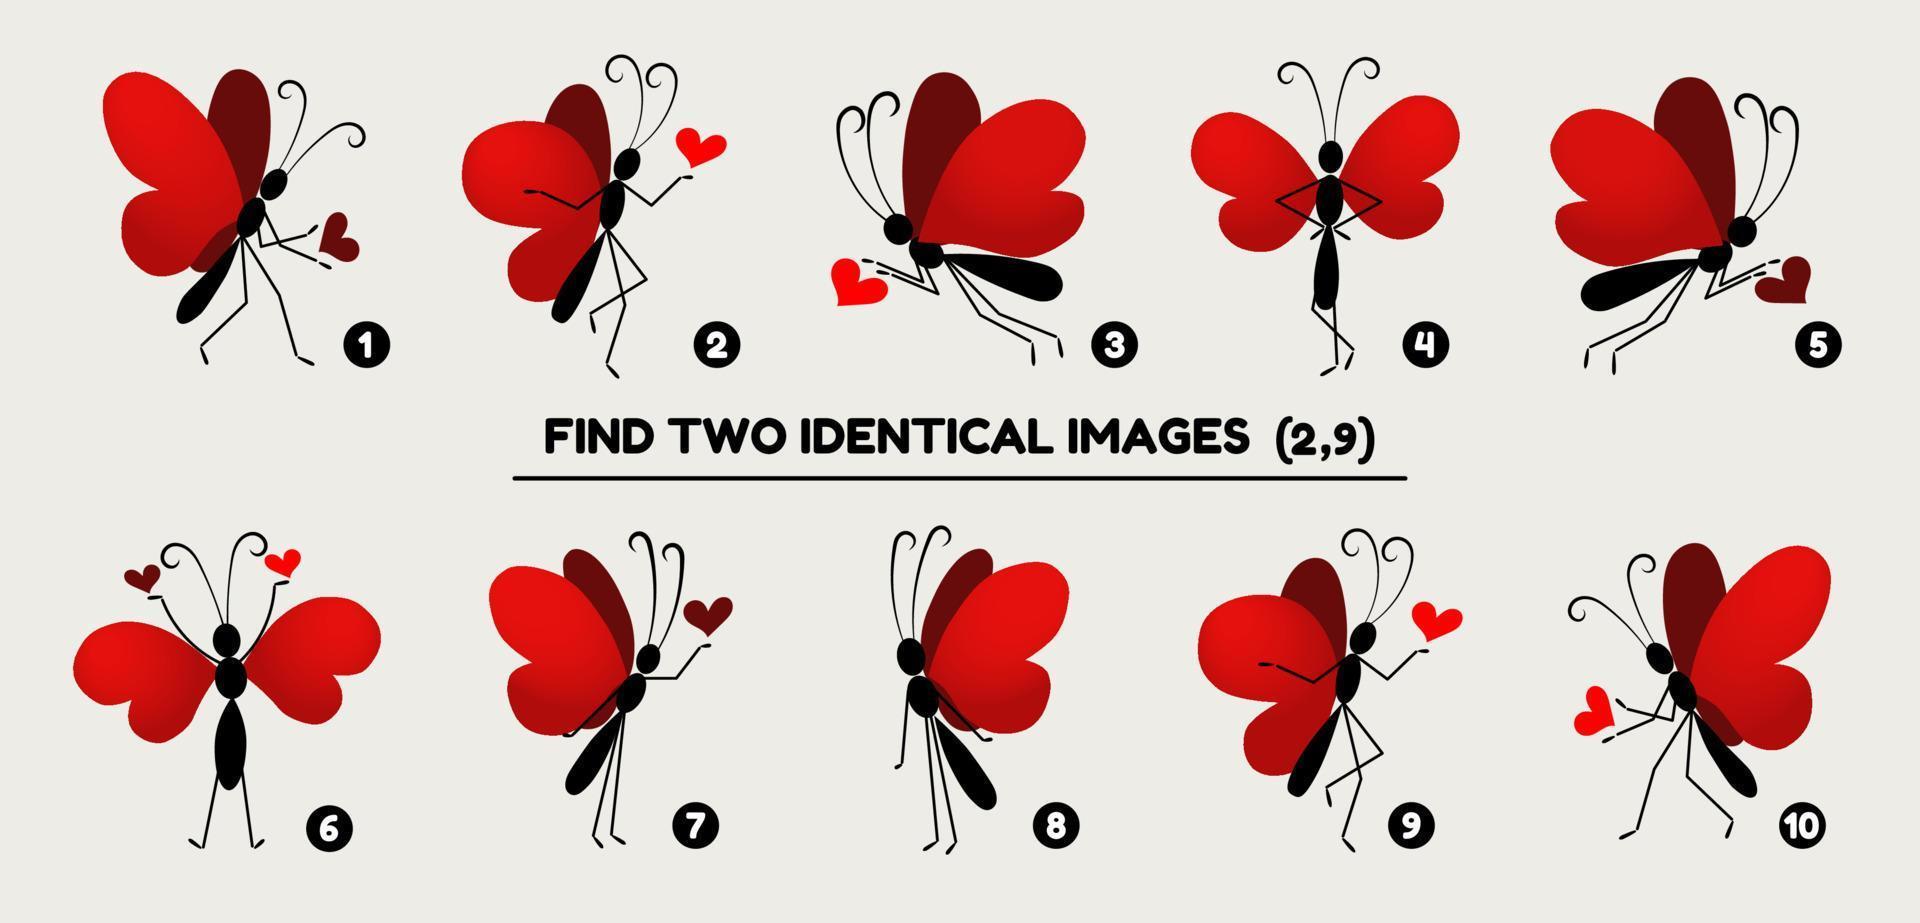 Red cartoon butterfly with thin legs playing with small little hearts.The educational matching game for preschool kids. Task is to compare items and find two identical chicks. Vector illustration